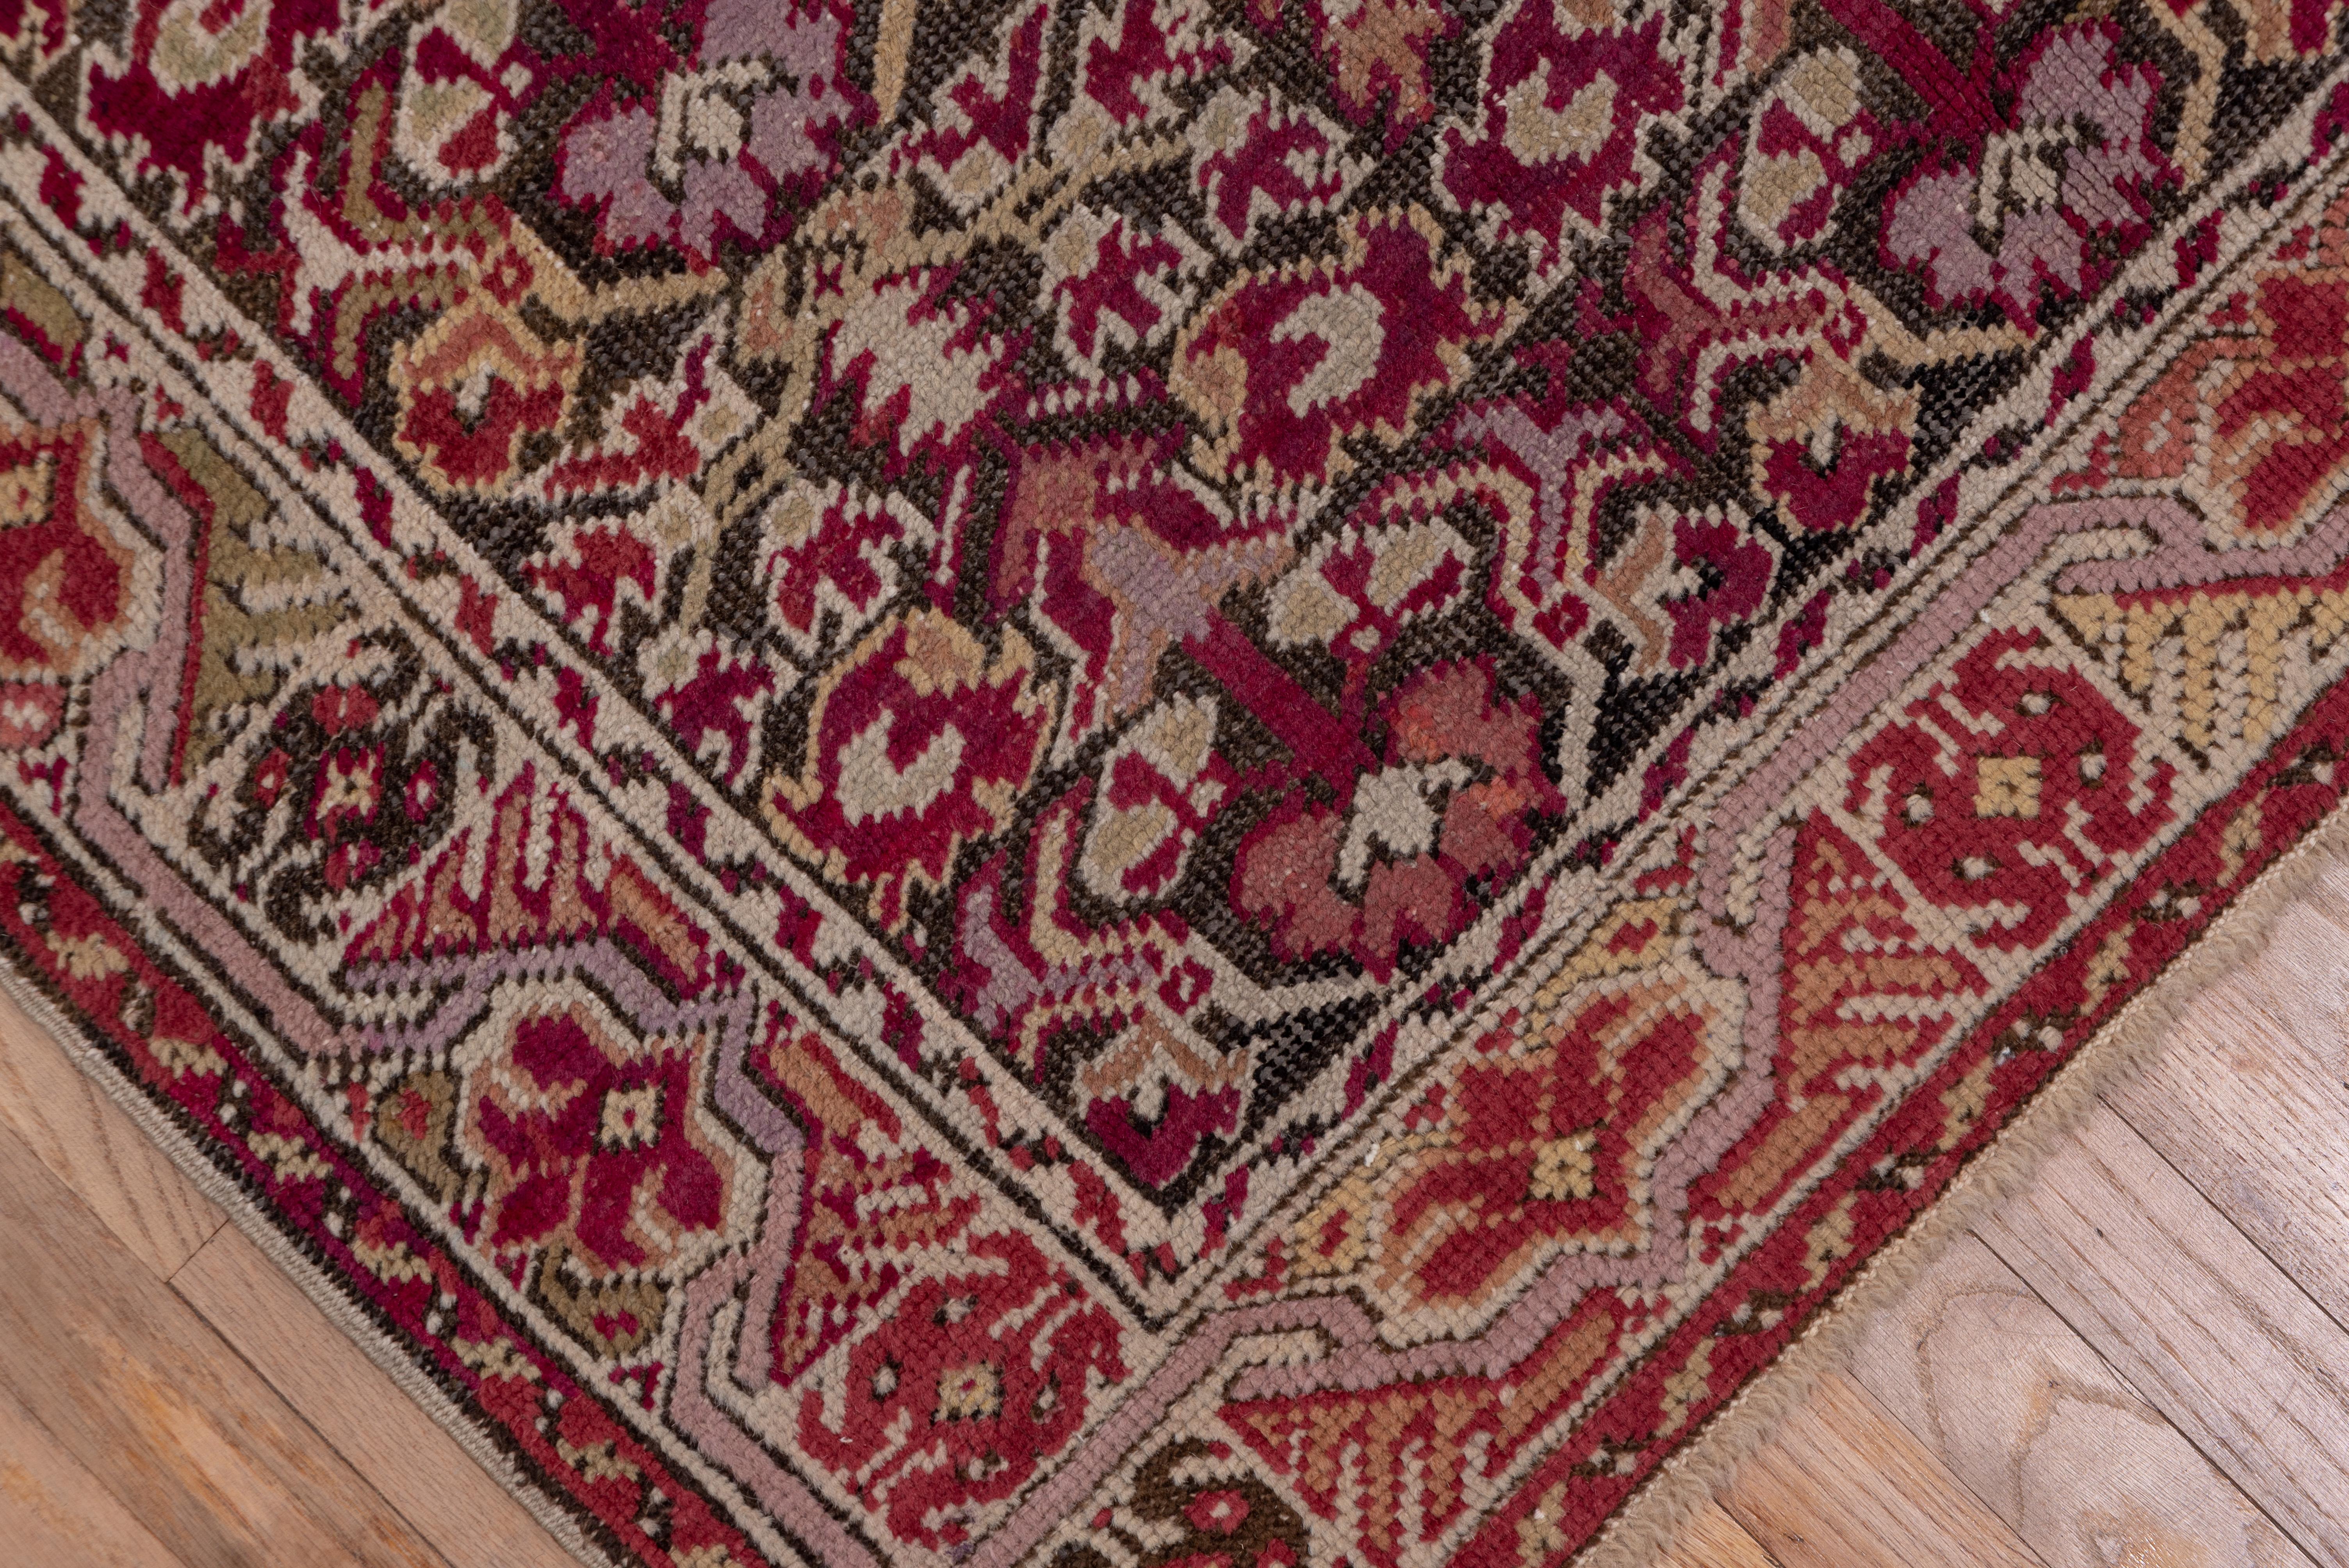 Wool Finely Woven Antique Turkish Ghiordes Rug, Ruby Red Field, circa 1900s For Sale